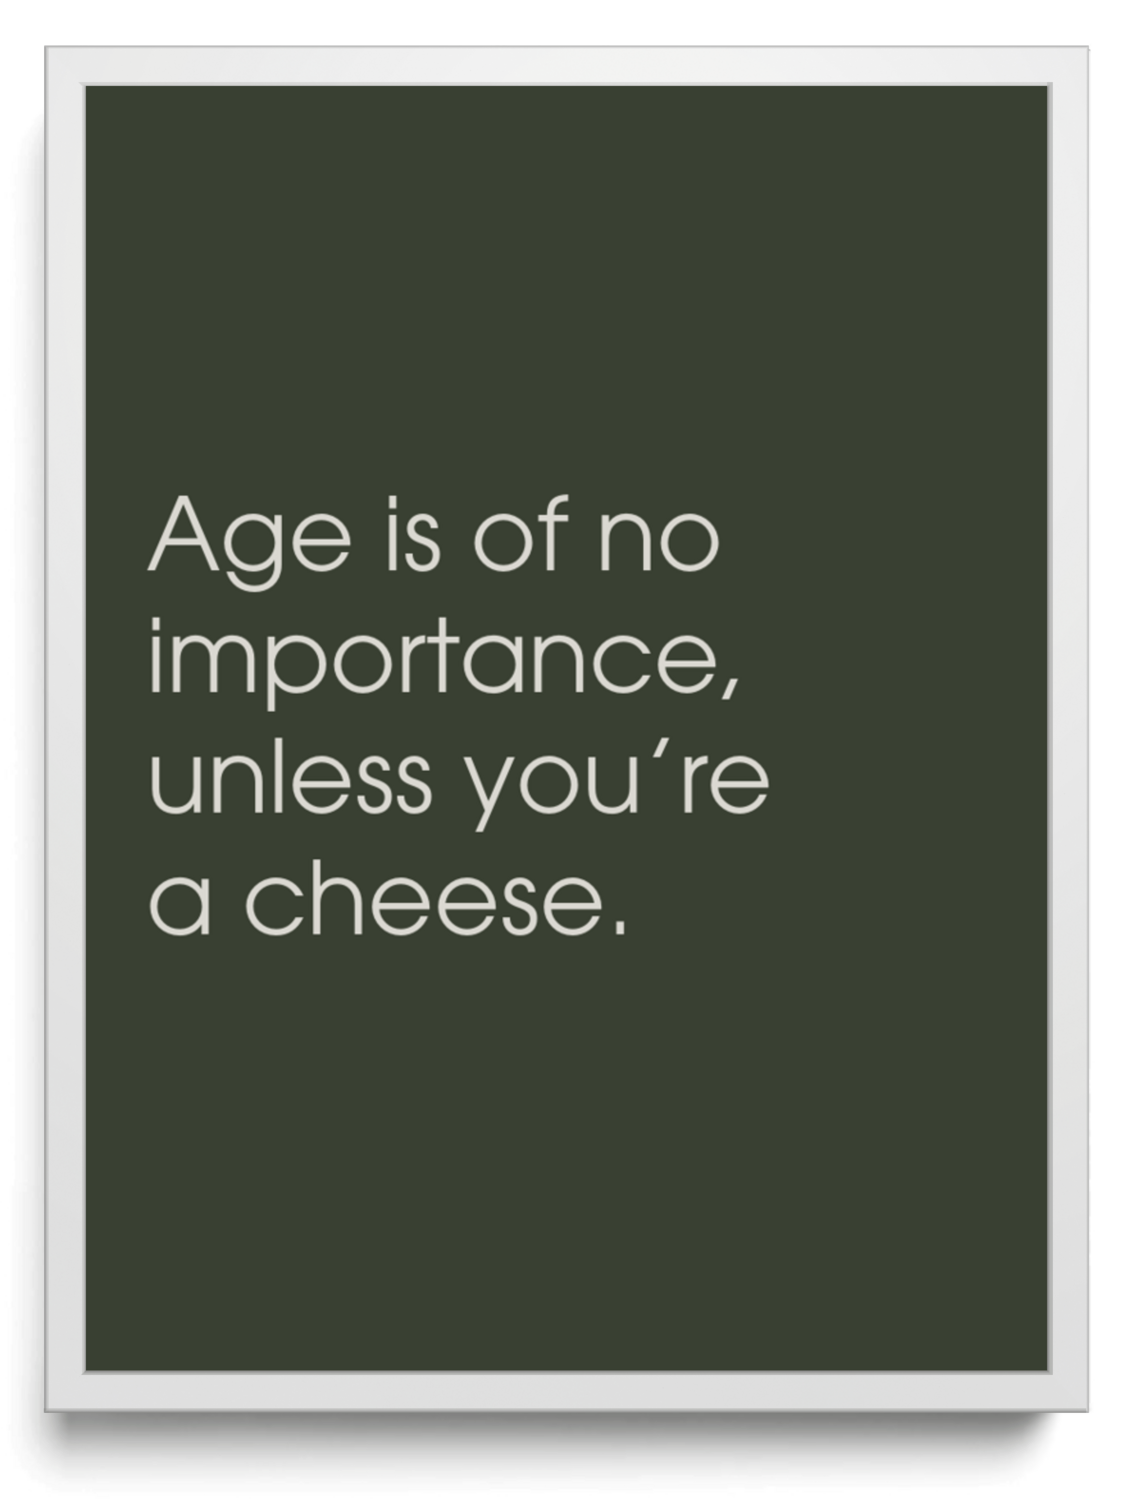 Age is of no importance, unless you’re a cheese. framed typographic print